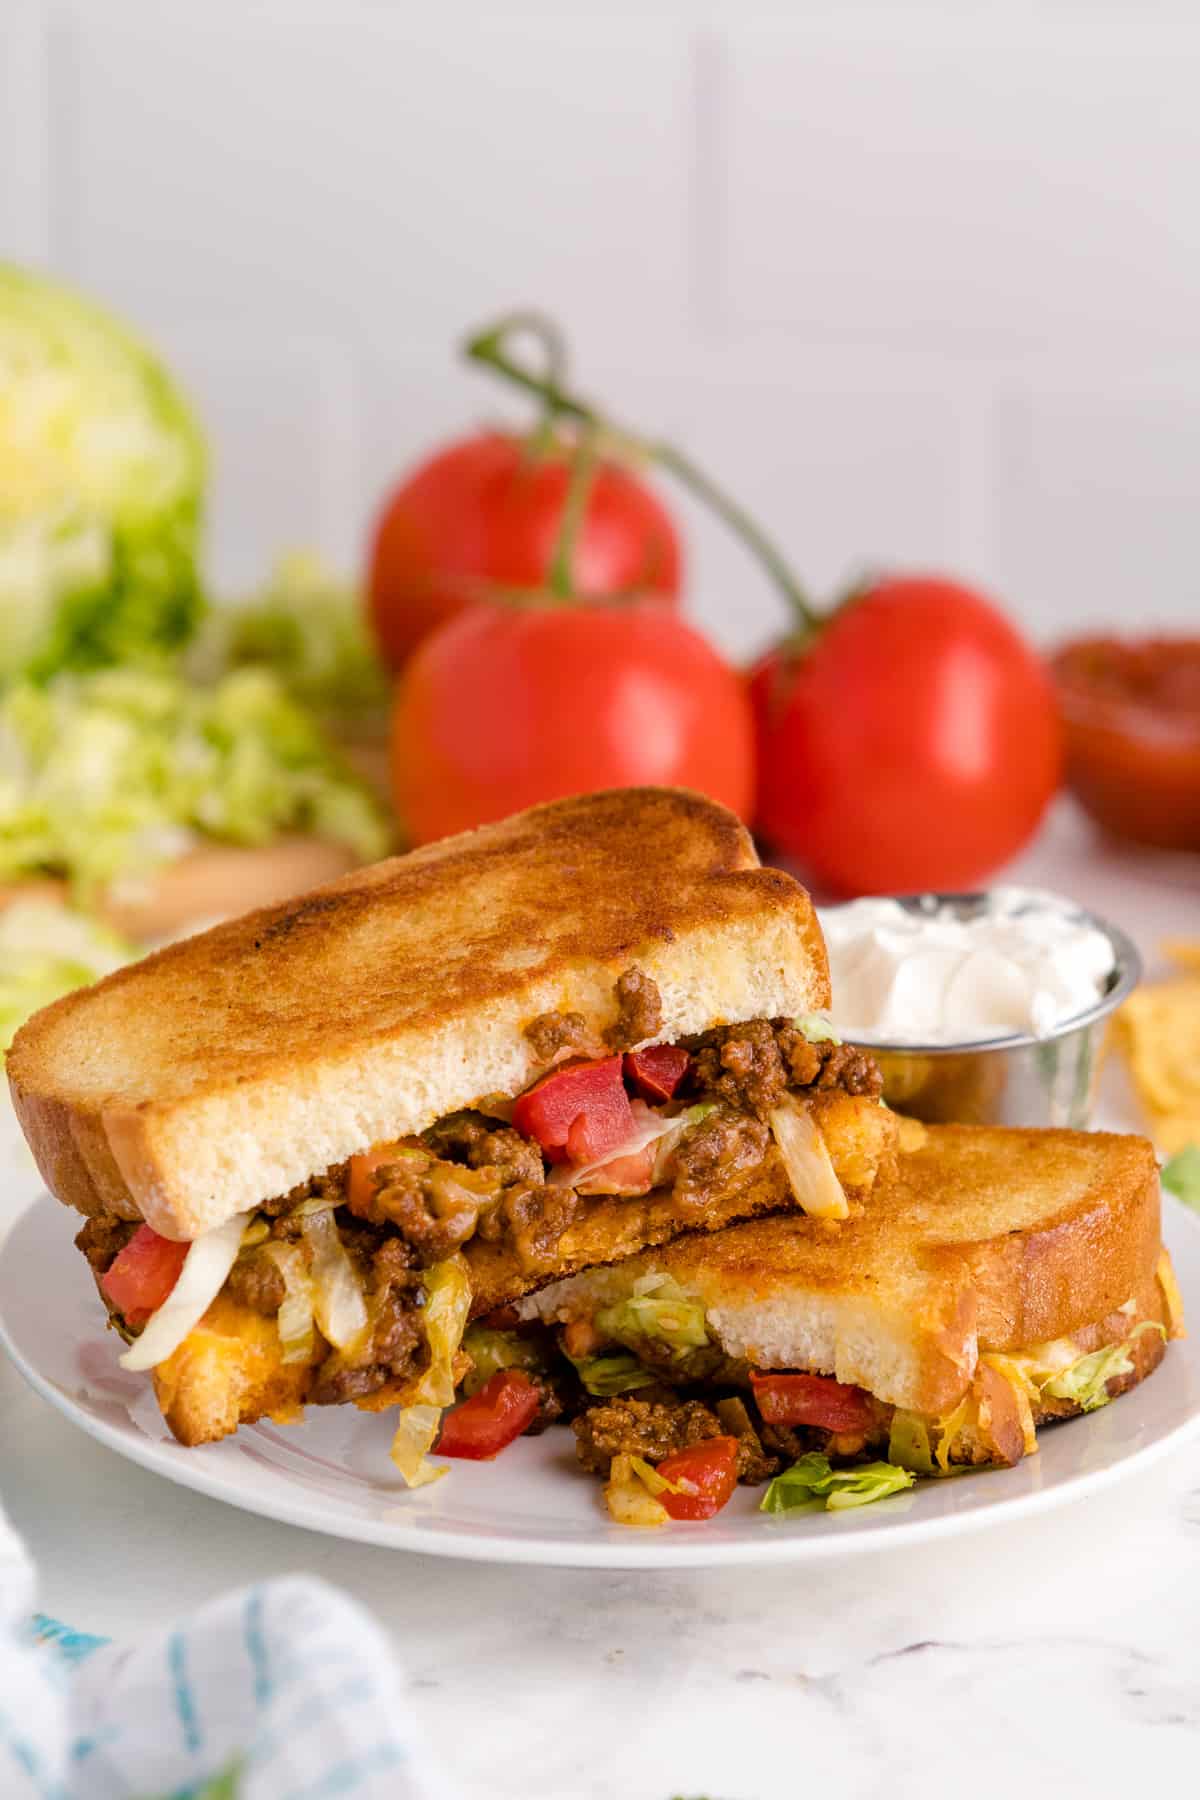 Taco grilled cheese sandwich on a plate.